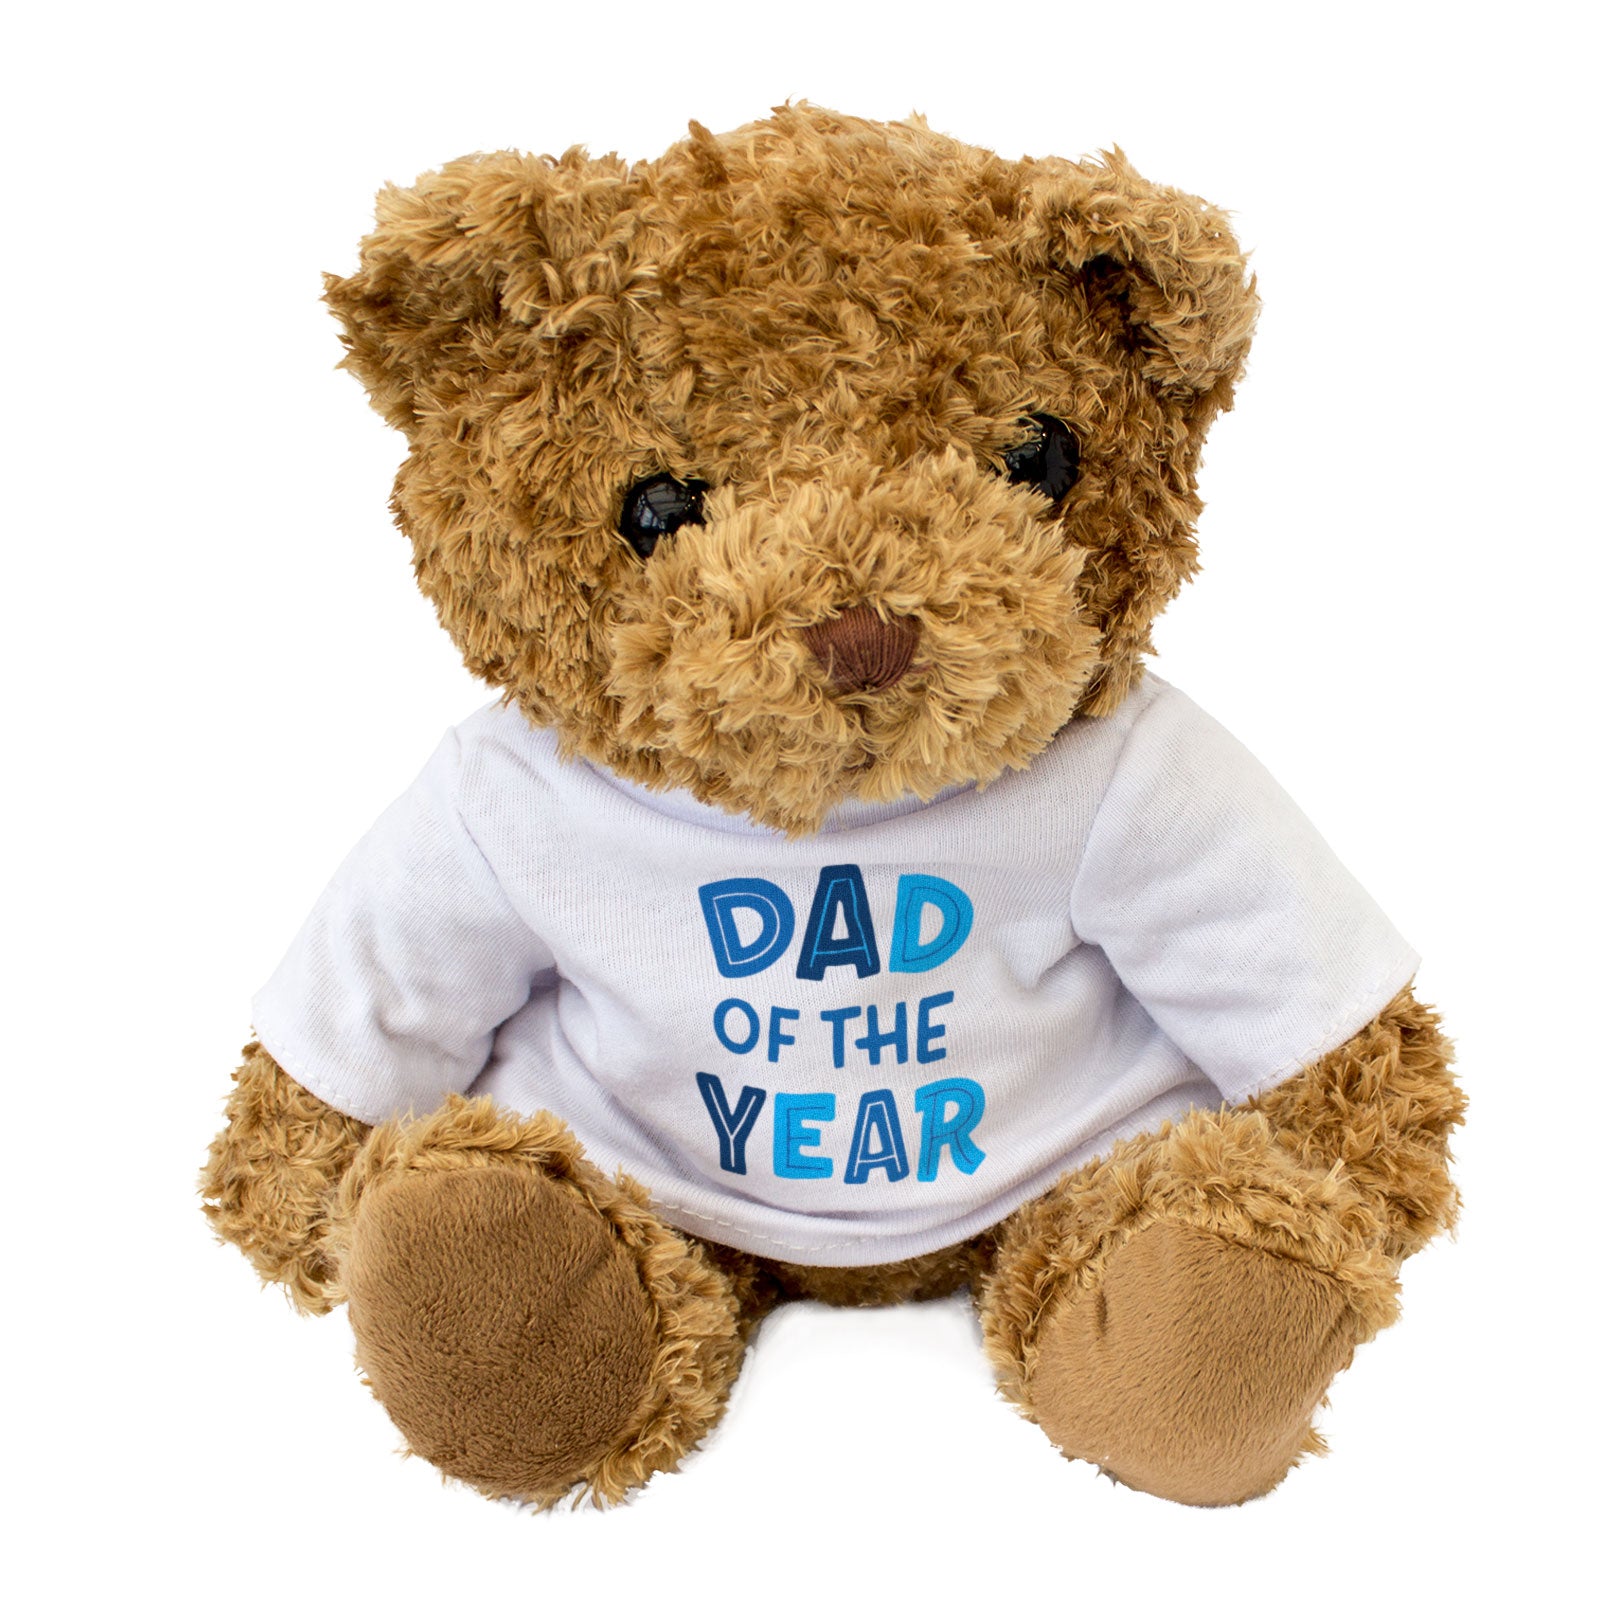 Dad Of The Year - Teddy Bear - Gift Present